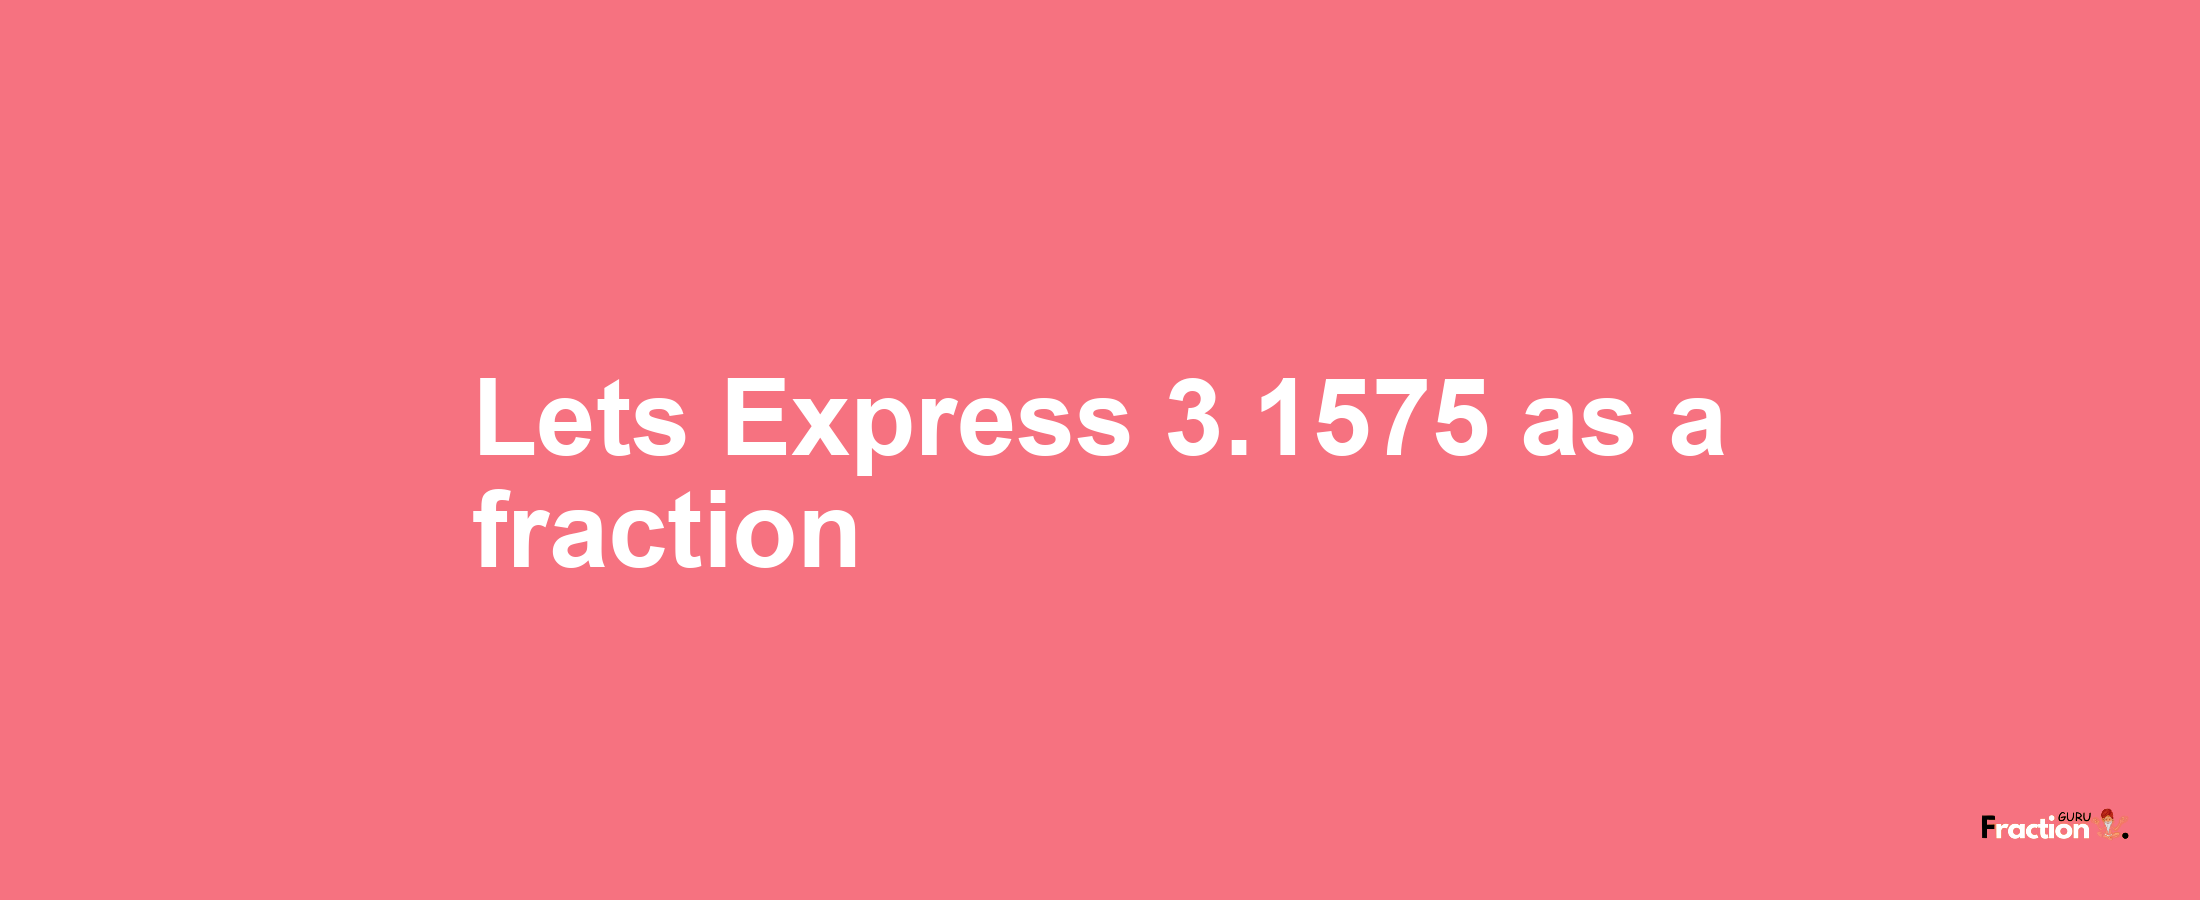 Lets Express 3.1575 as afraction